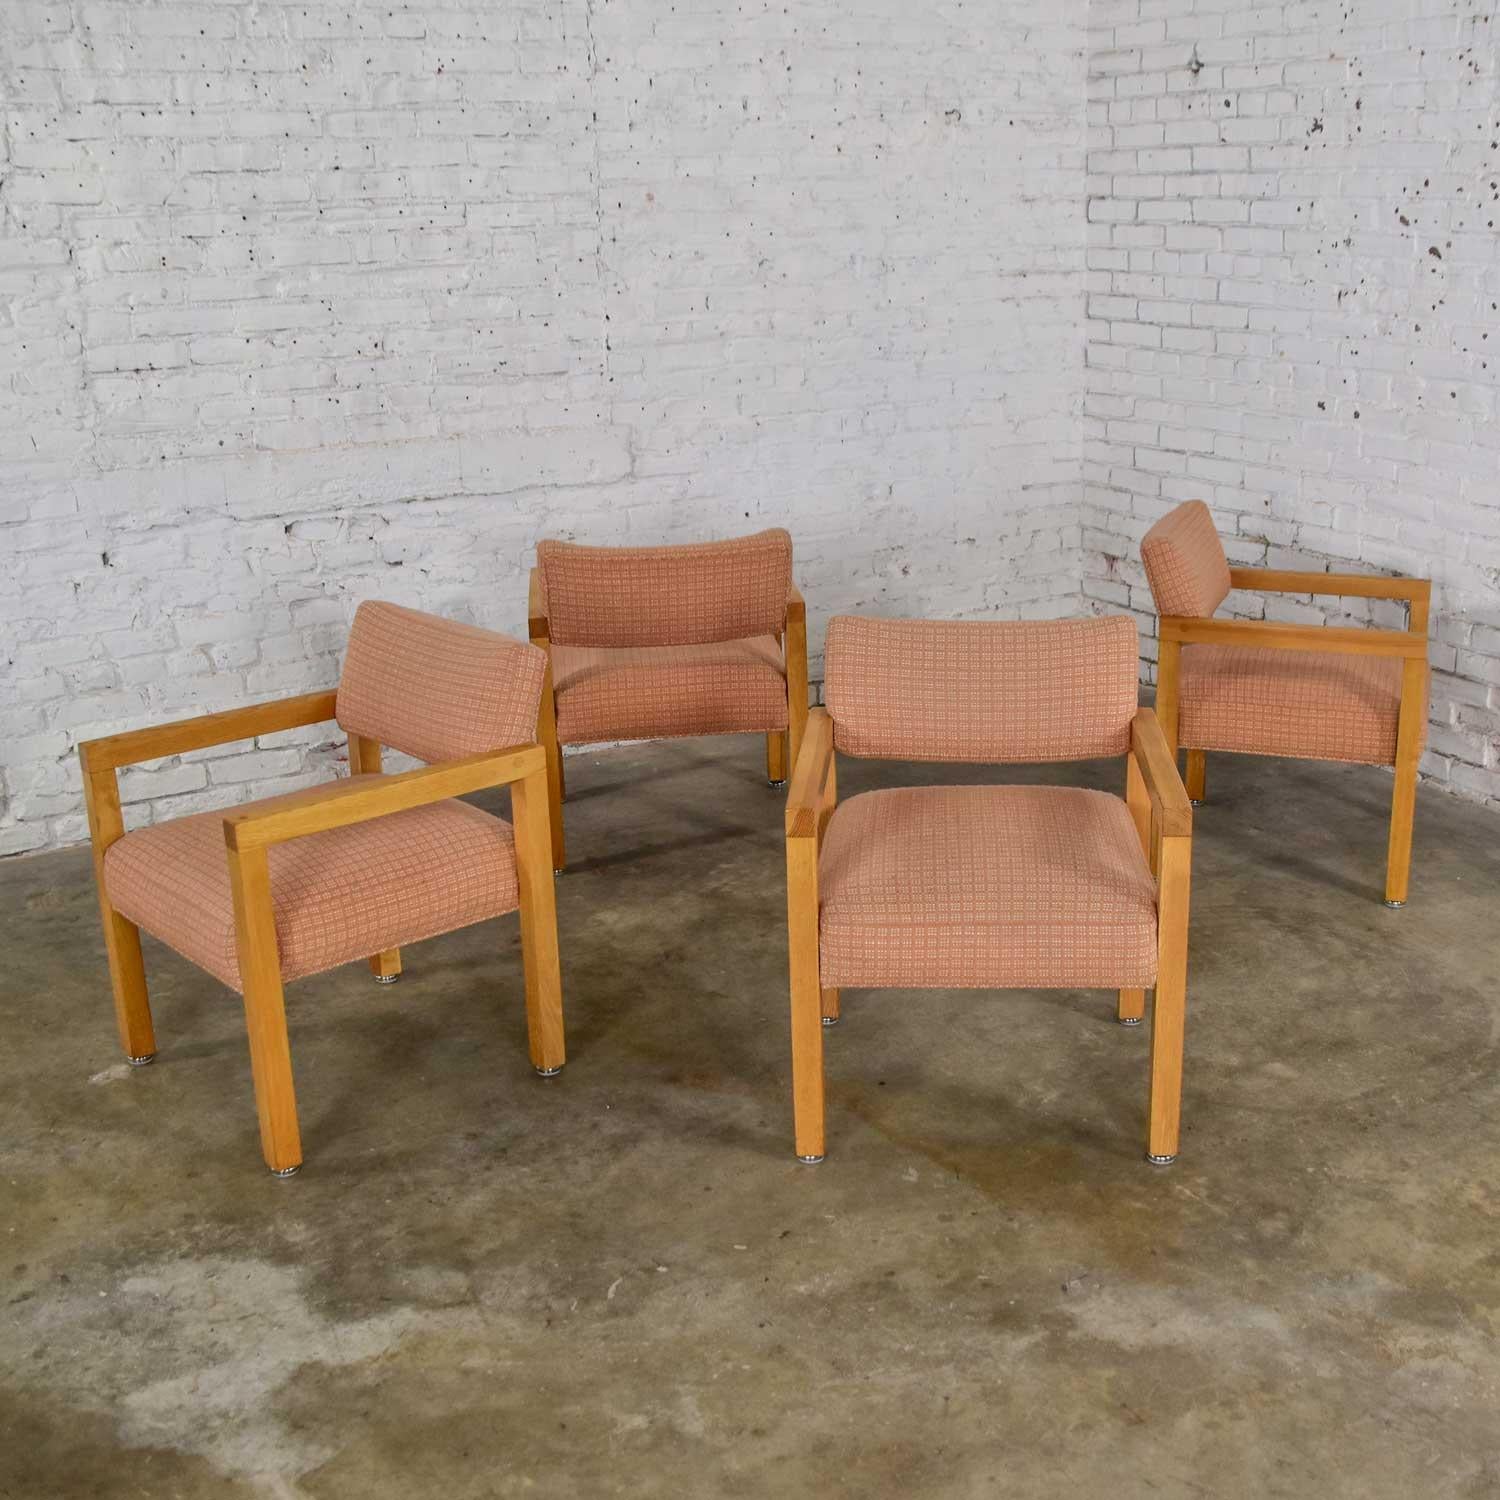 Modern Square Frame Oak Armchairs with Original Blush Textured Fabric, Set of 4 For Sale 1